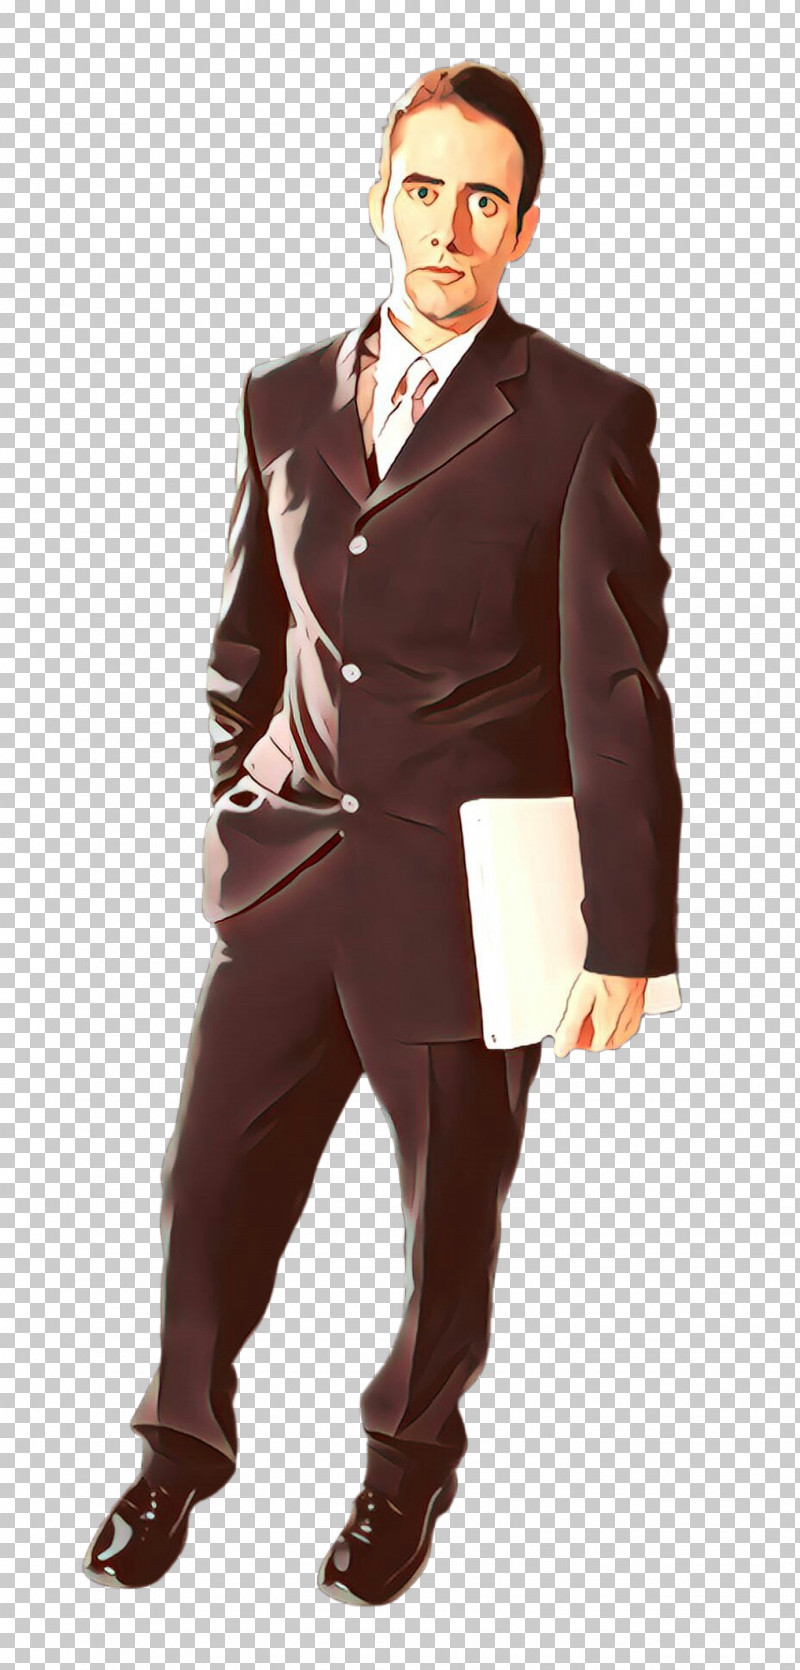 Suit Clothing Formal Wear Standing Brown PNG, Clipart, Brown, Clothing, Costume, Formal Wear, Gentleman Free PNG Download